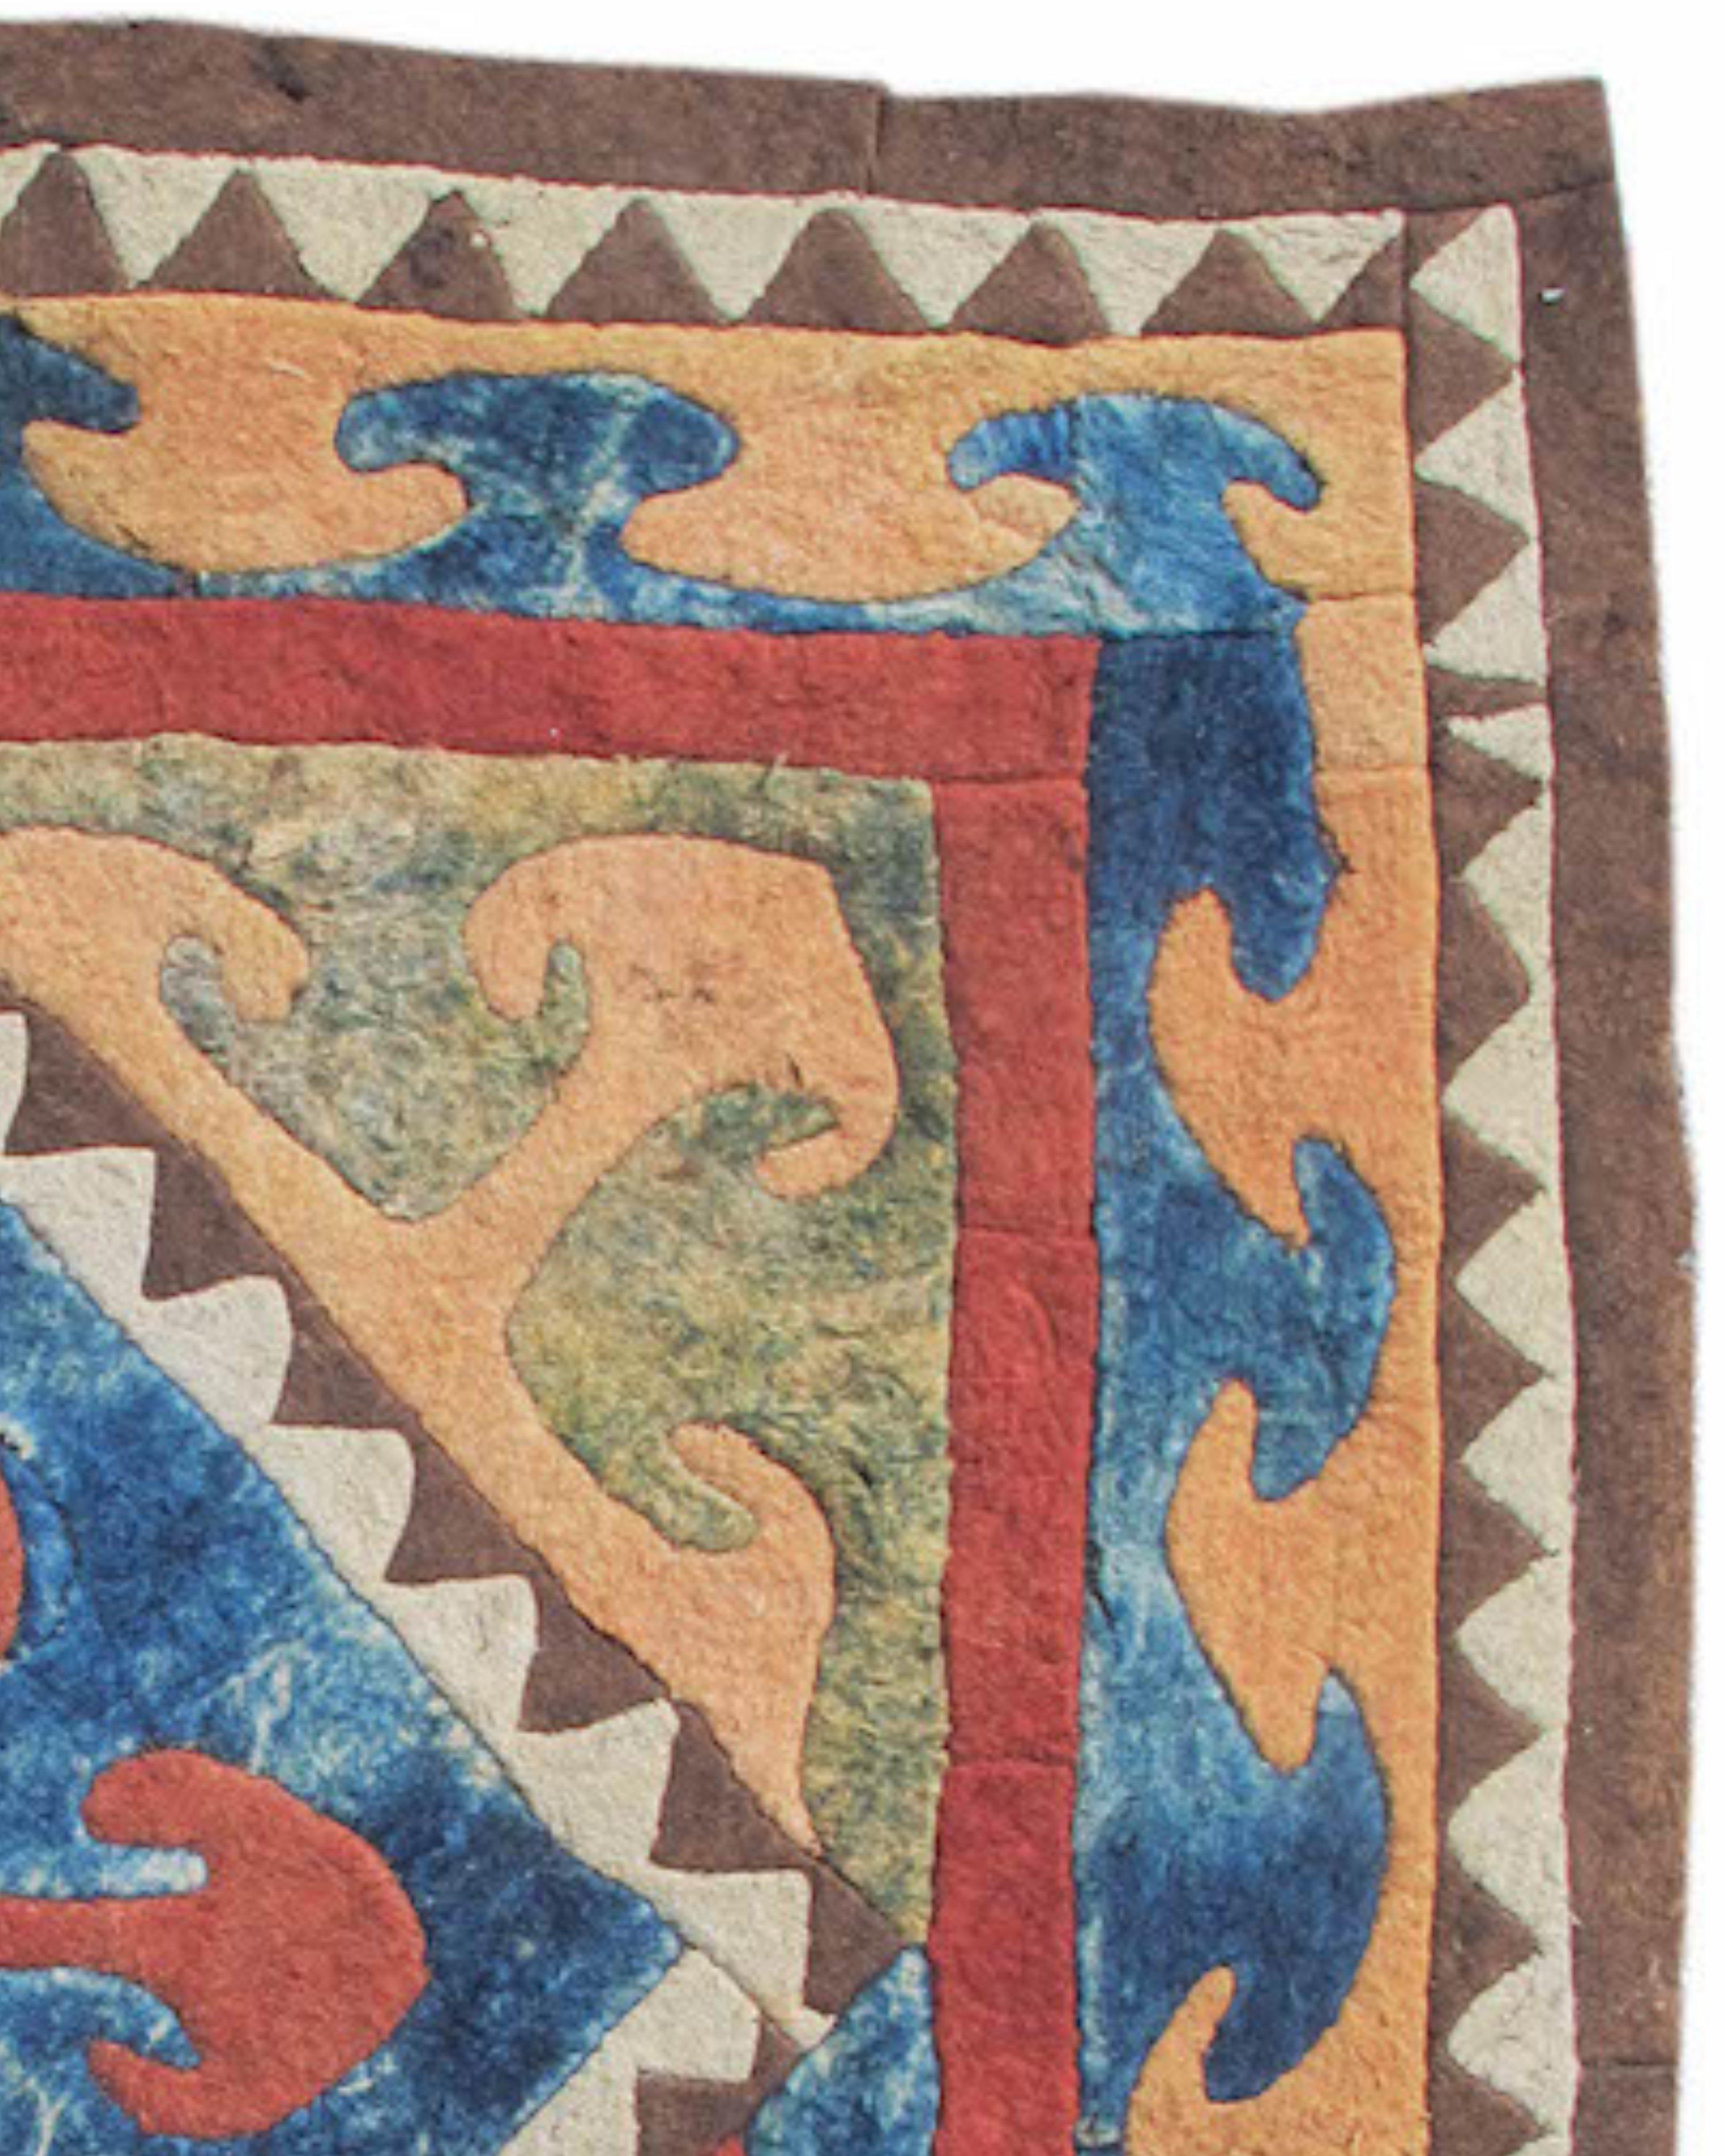 Kyrgyz Felt Fragment Rug, 19th Century In Excellent Condition For Sale In San Francisco, CA